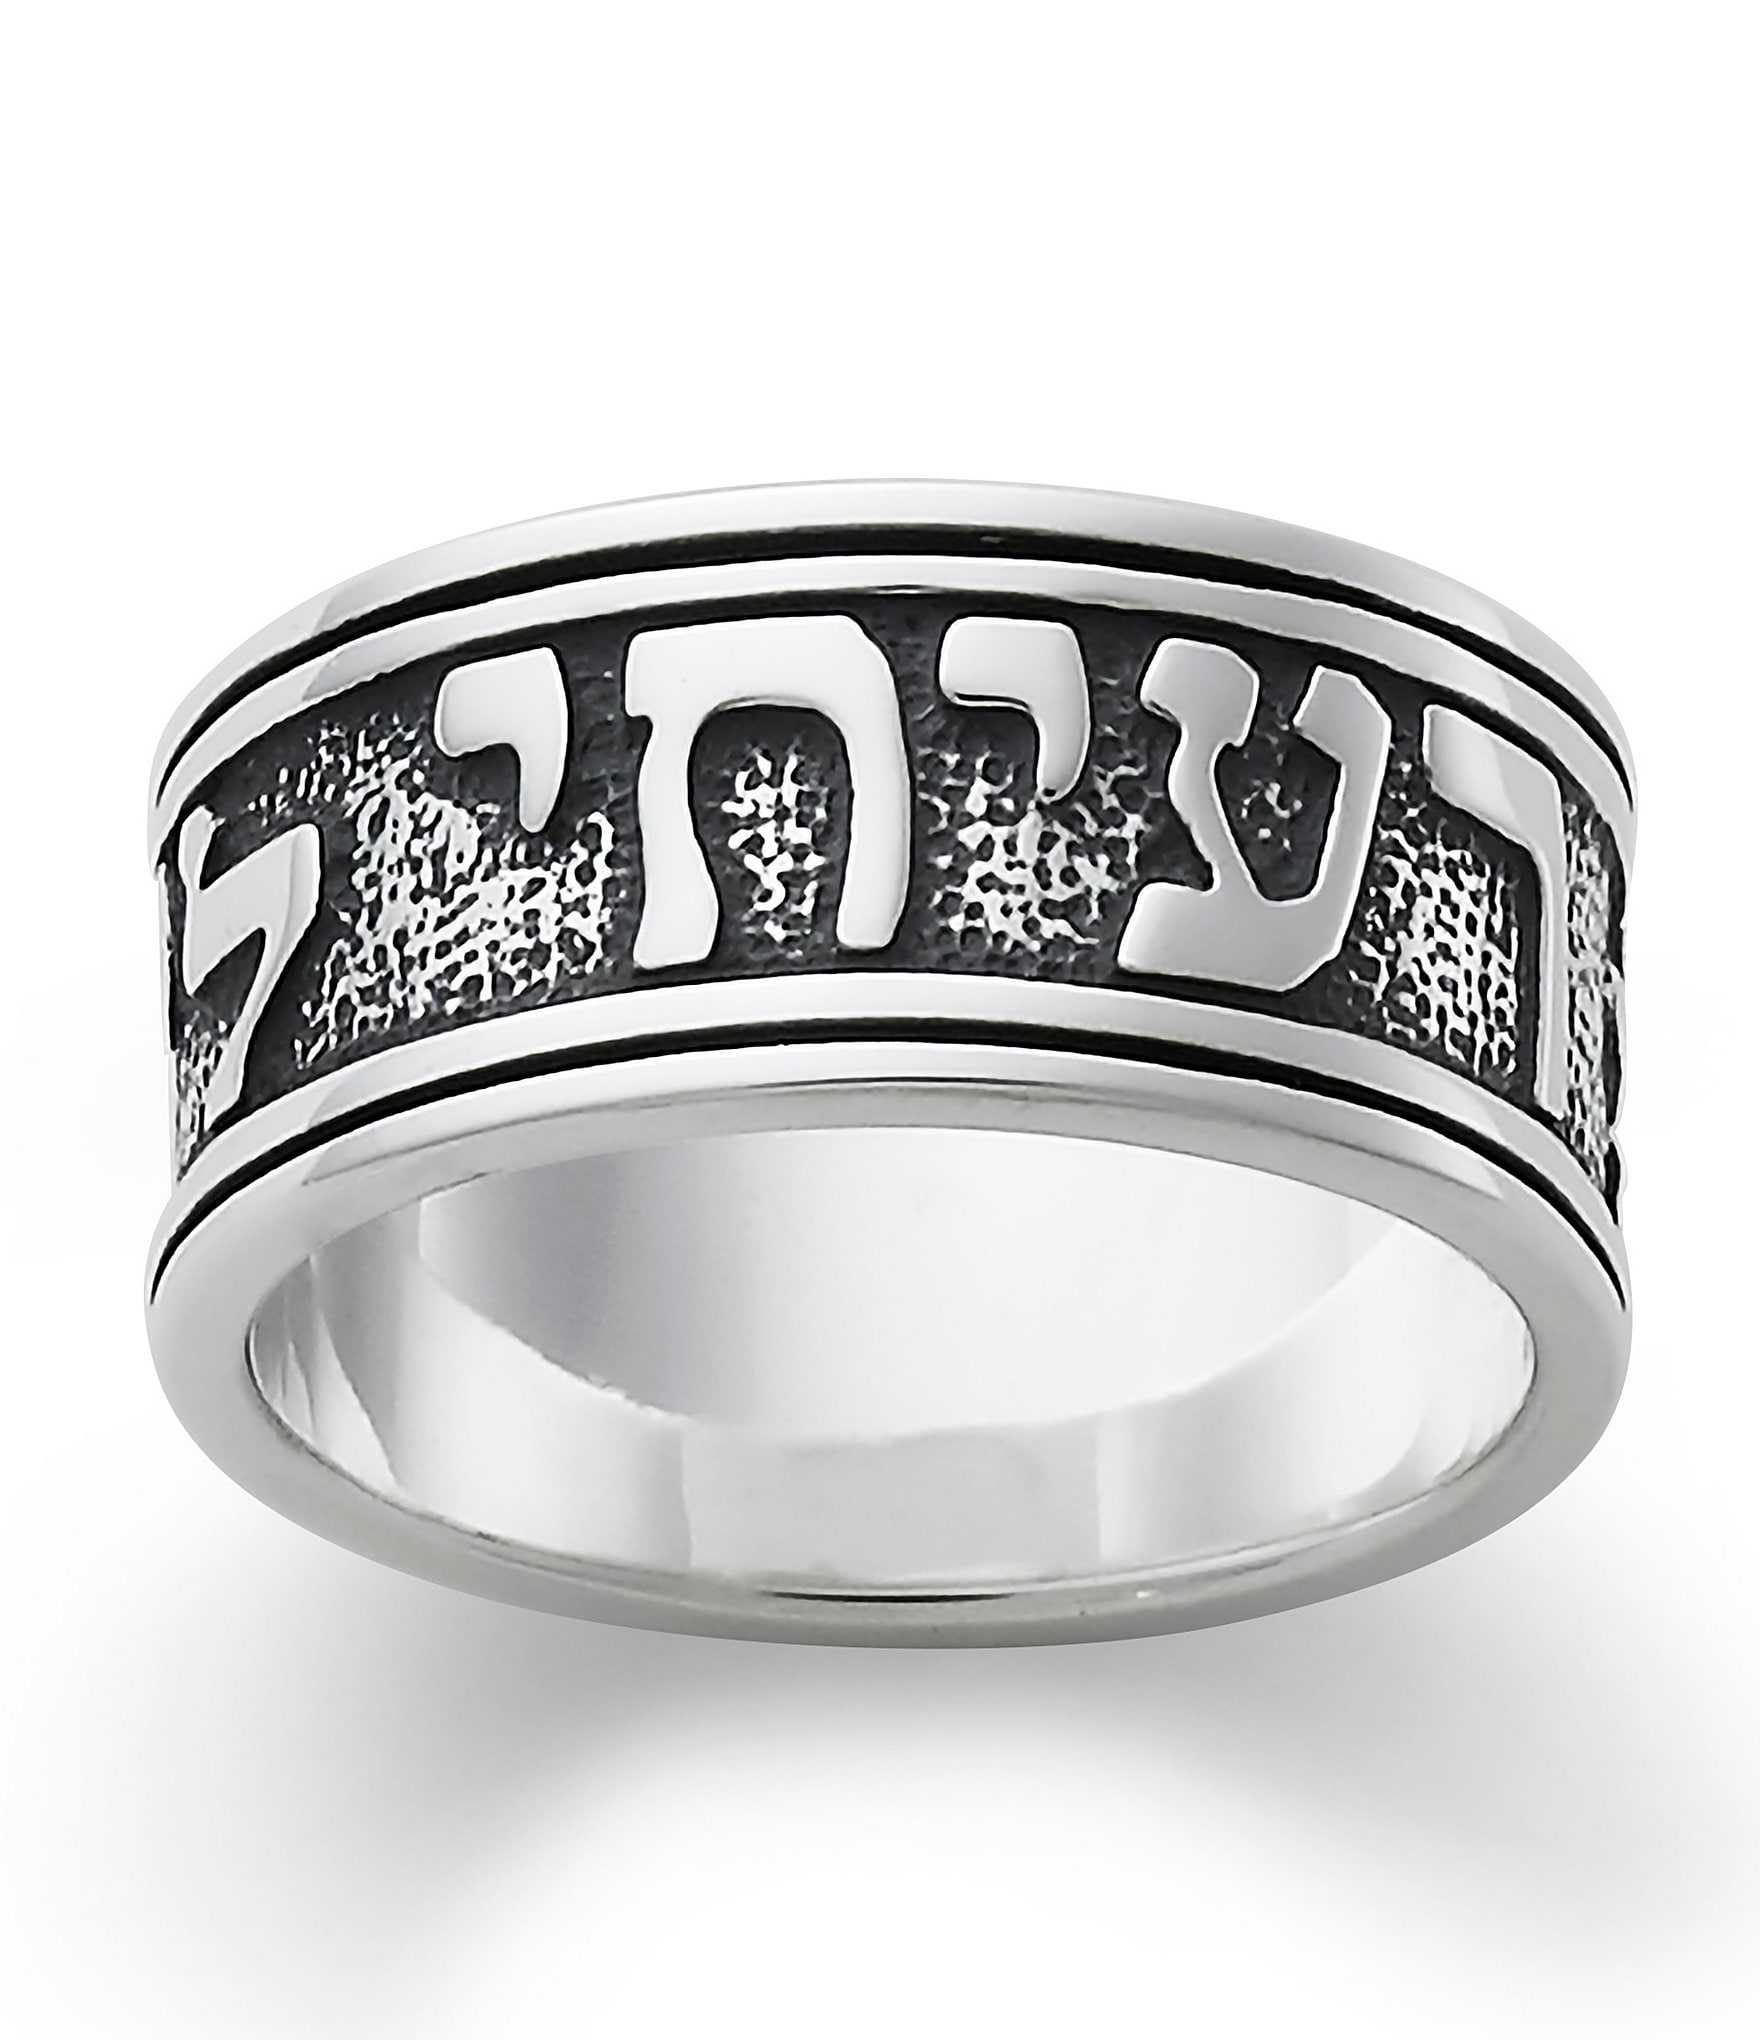 James Avery james avery sterling silver song of solomon band ring size 9.5 